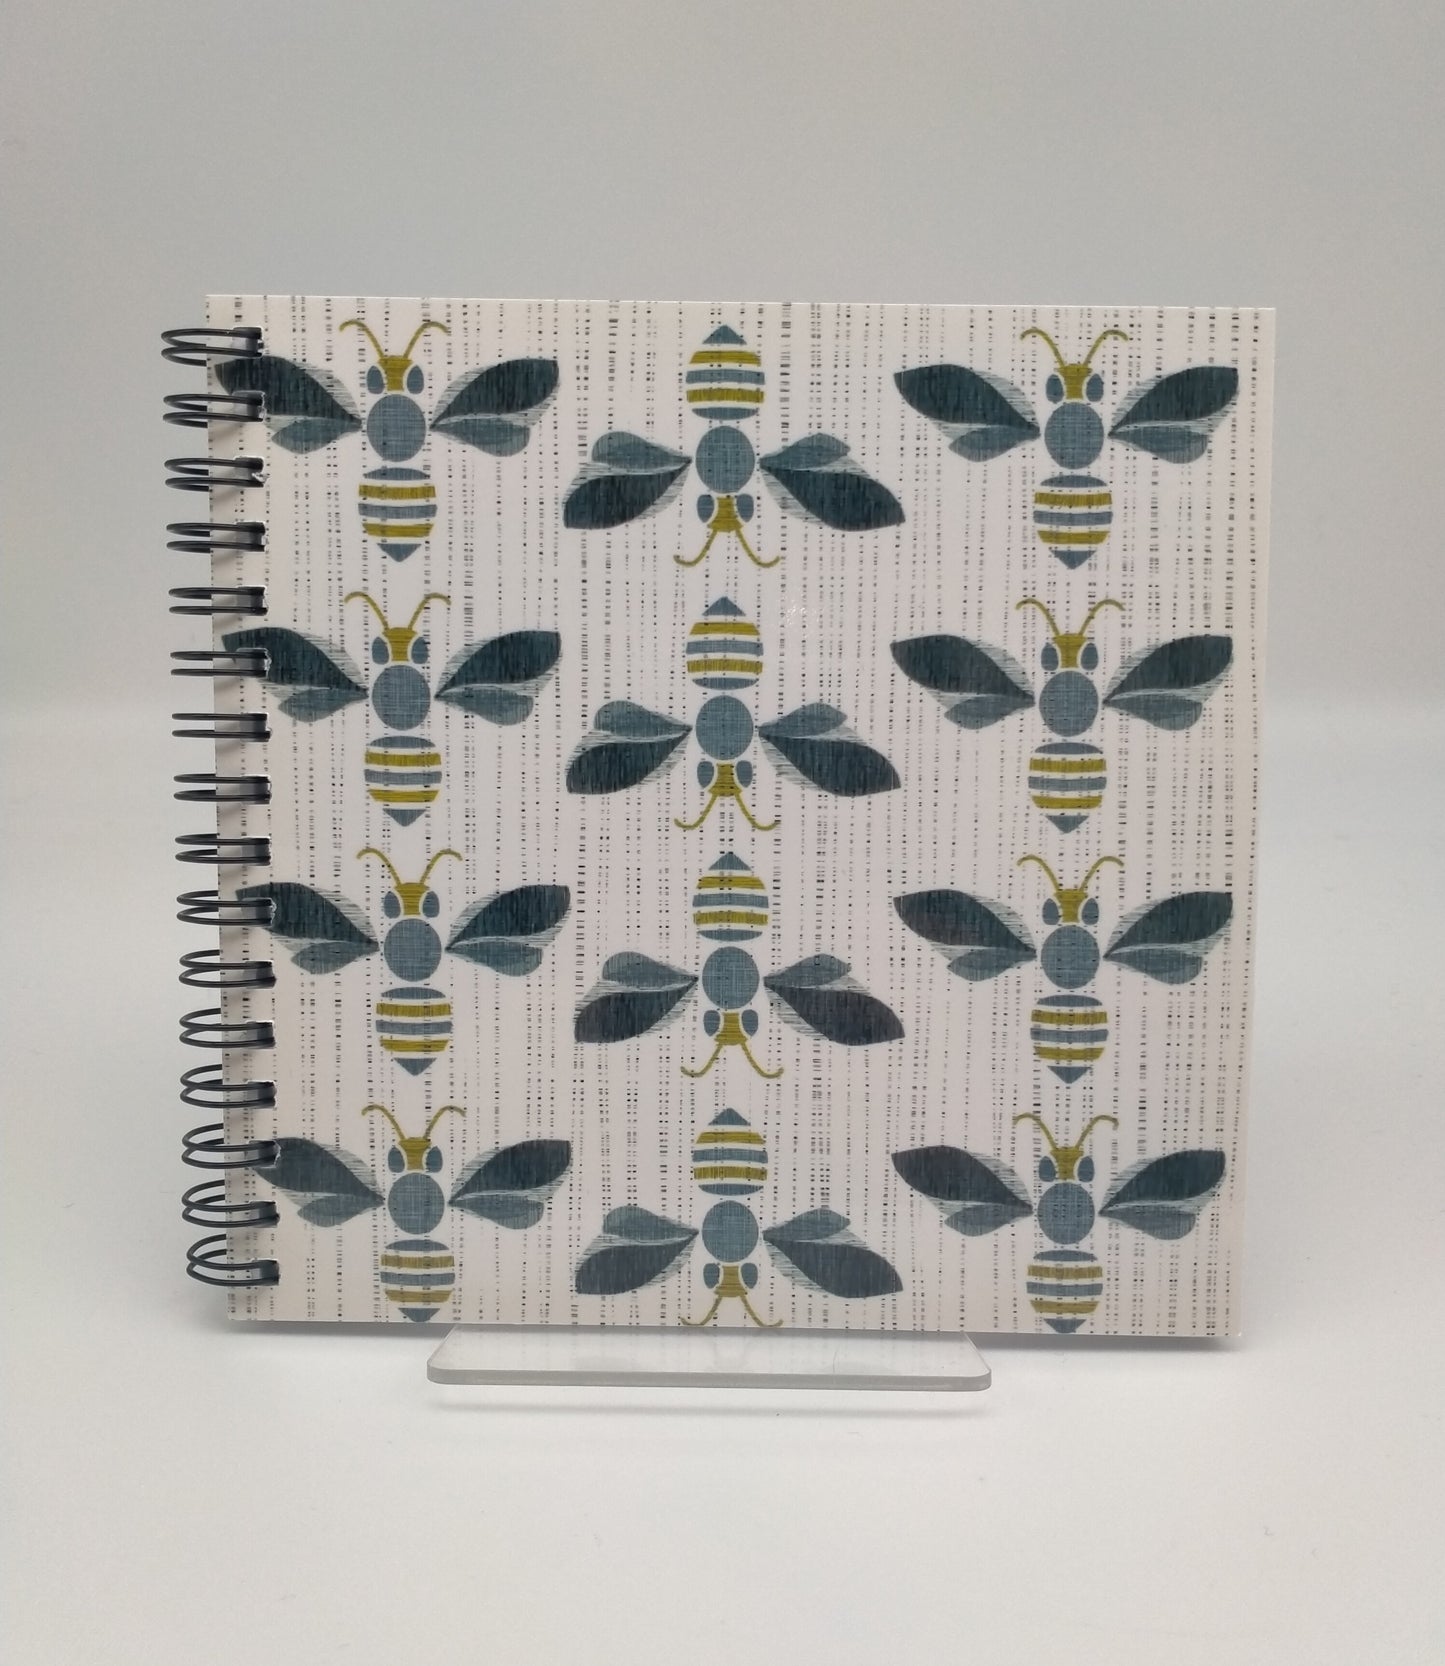 A square notebook with 12 bees in three rows on the cover. Spiral bound. Grey, black and gold tones.